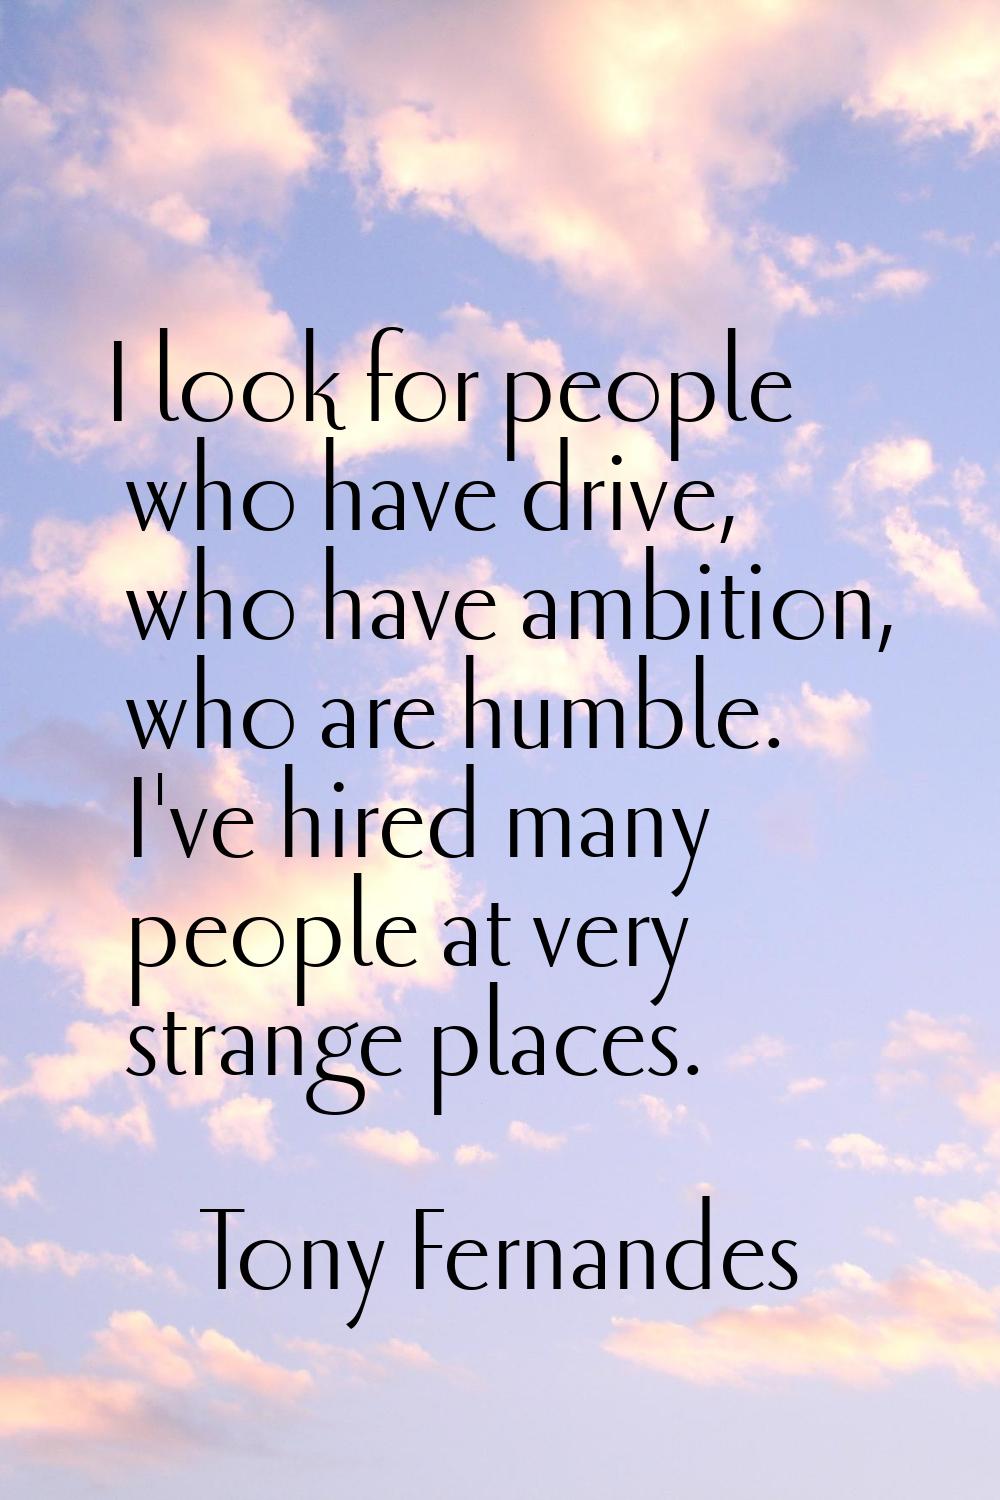 I look for people who have drive, who have ambition, who are humble. I've hired many people at very